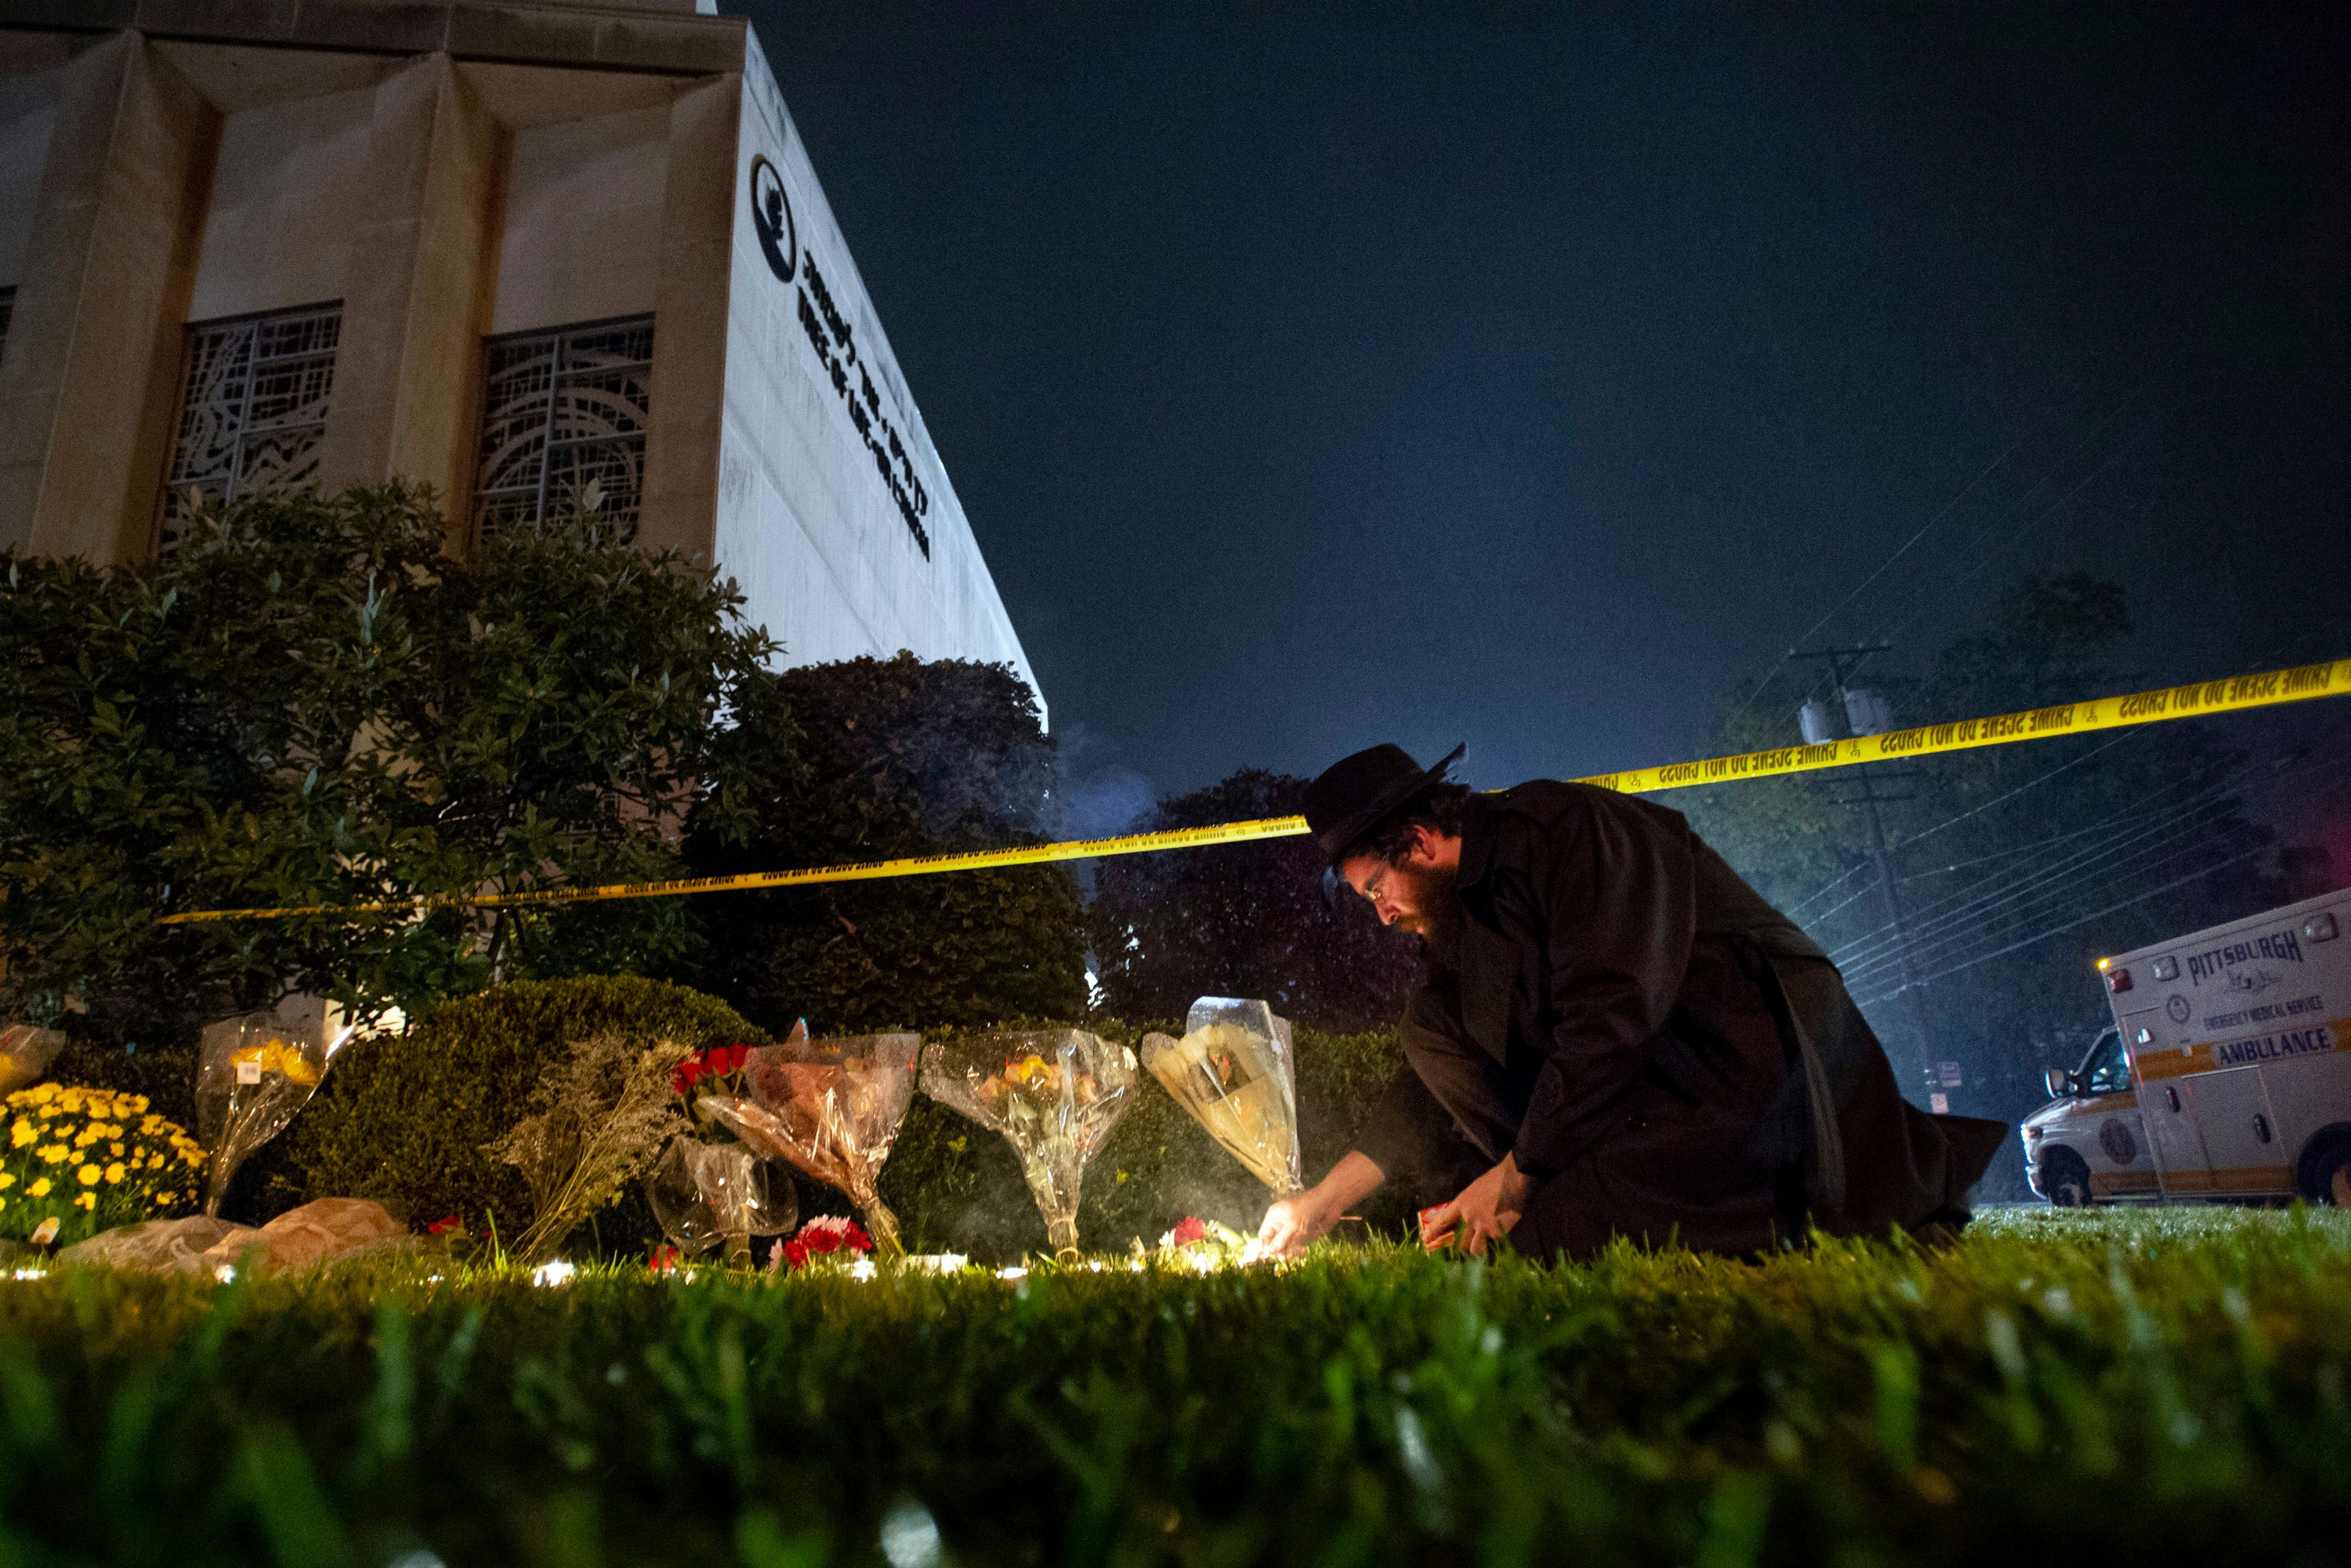 In this Oct. 27, 2018 photo, Rabbi Eli Wilansky lights a candle after a mass shooting at Tree of Life  Synagogue in Pittsburgh's Squirrel Hill neighborhood. Robert Bowers, the suspect in Saturday's mass shooting, expressed hatred of Jews during the rampage and told officers afterward that Jews were committing genocide and he wanted them all to die, according to charging documents made public Sunday. (Steph Chambers/Pittsburgh Post-Gazette via AP)